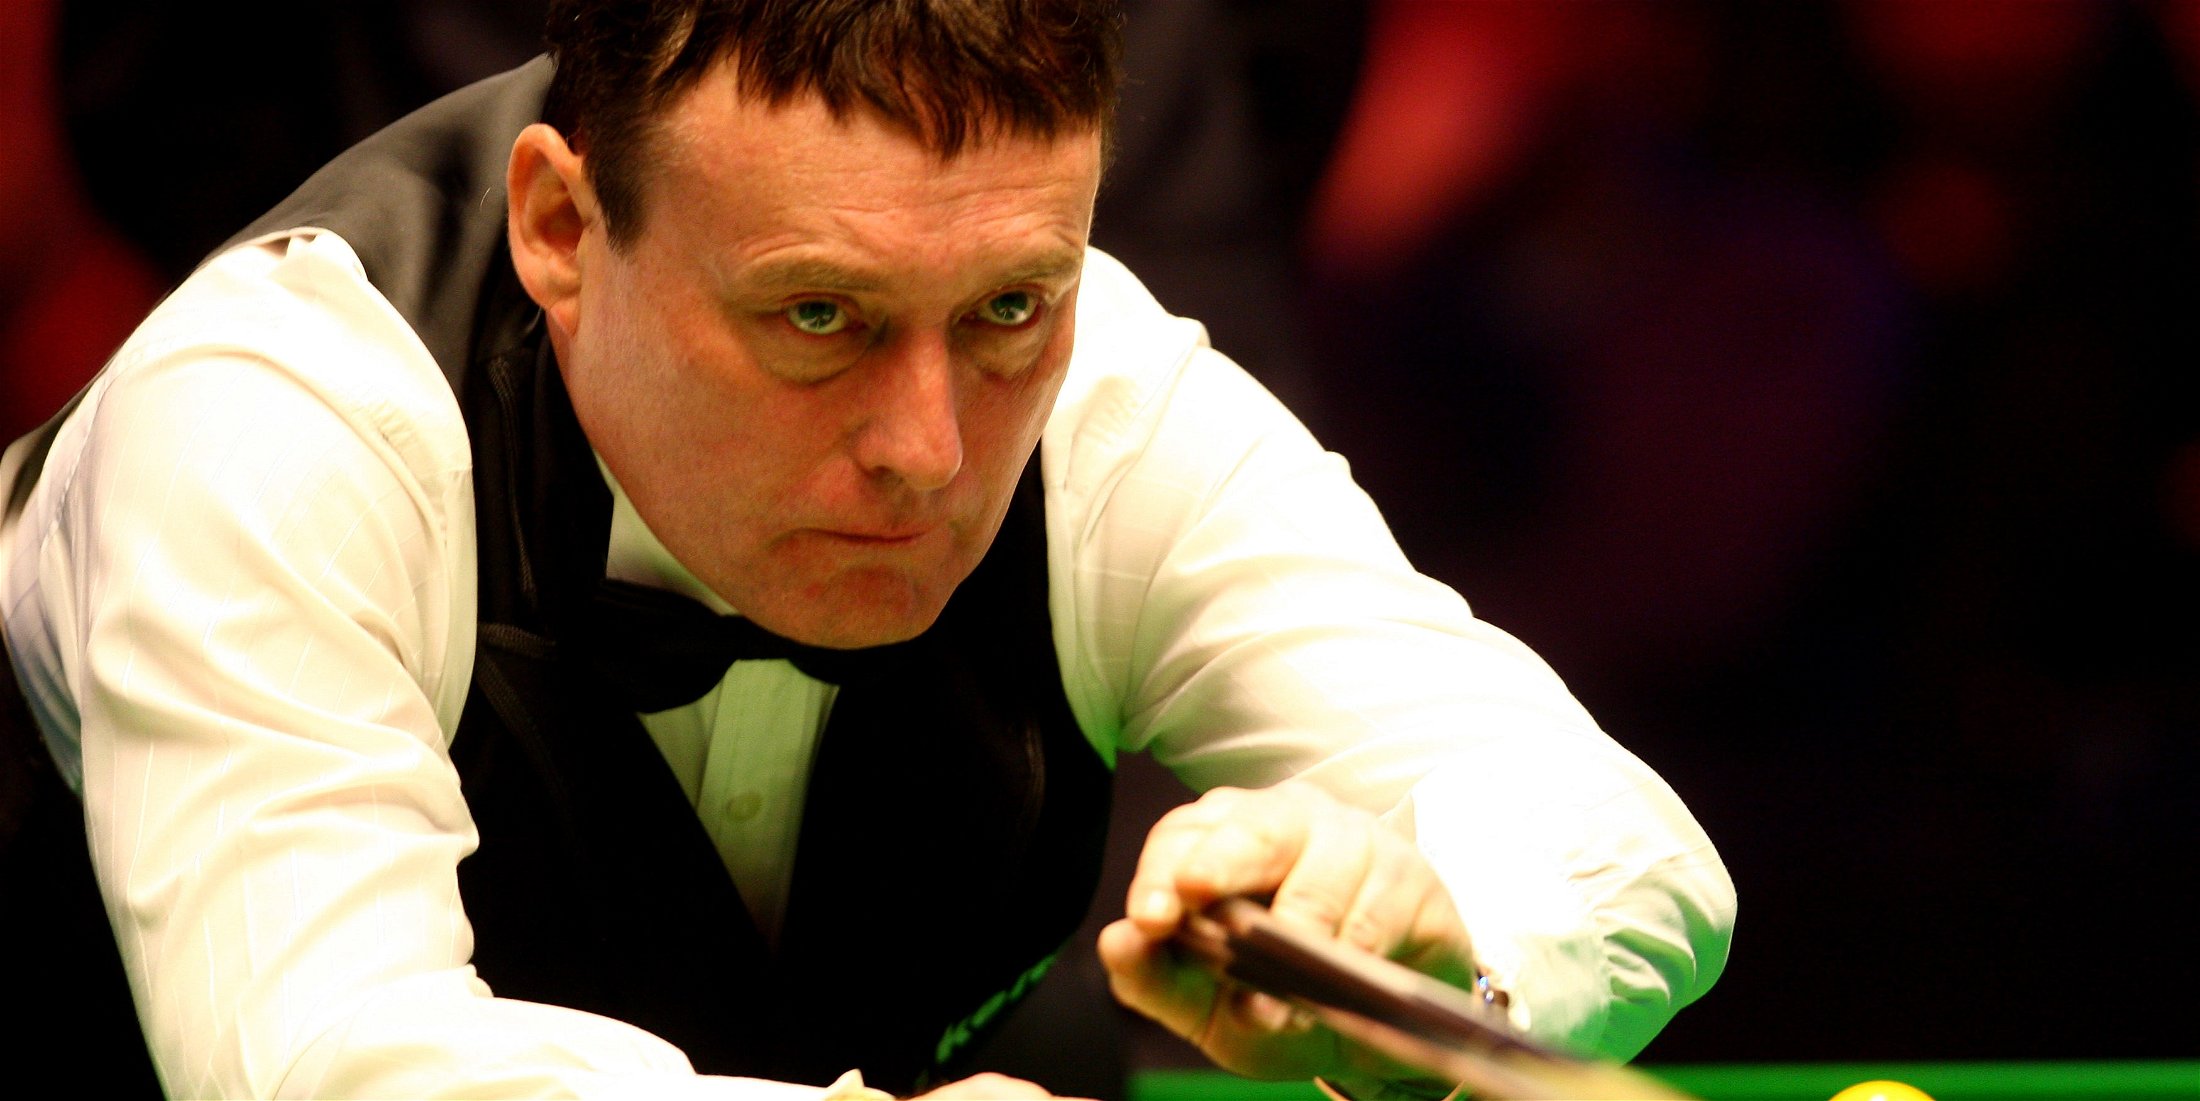 14 of the best snooker players who have never won a World Championship